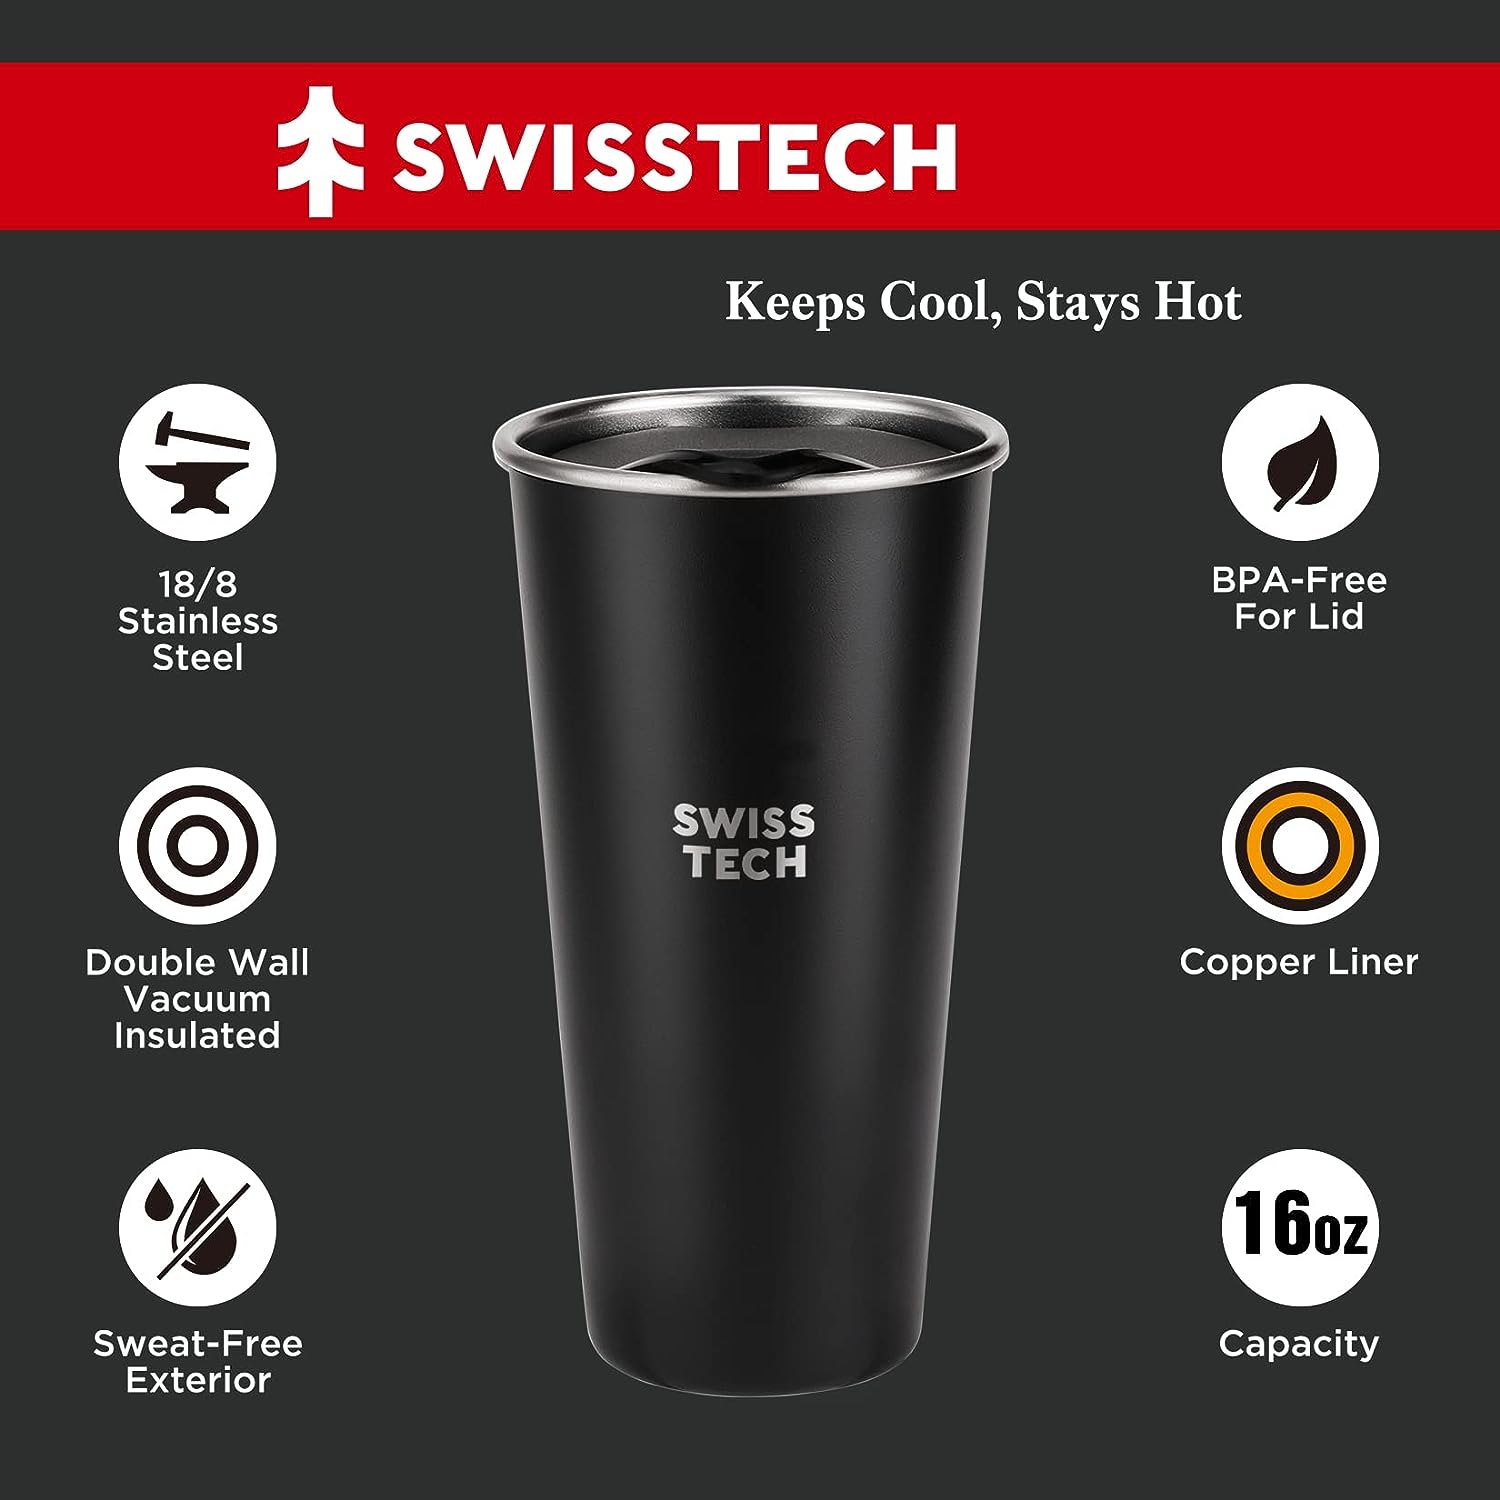 Swiss+Tech 16oz Double Wall Stainless Steel Cups with lids, 2 Pack